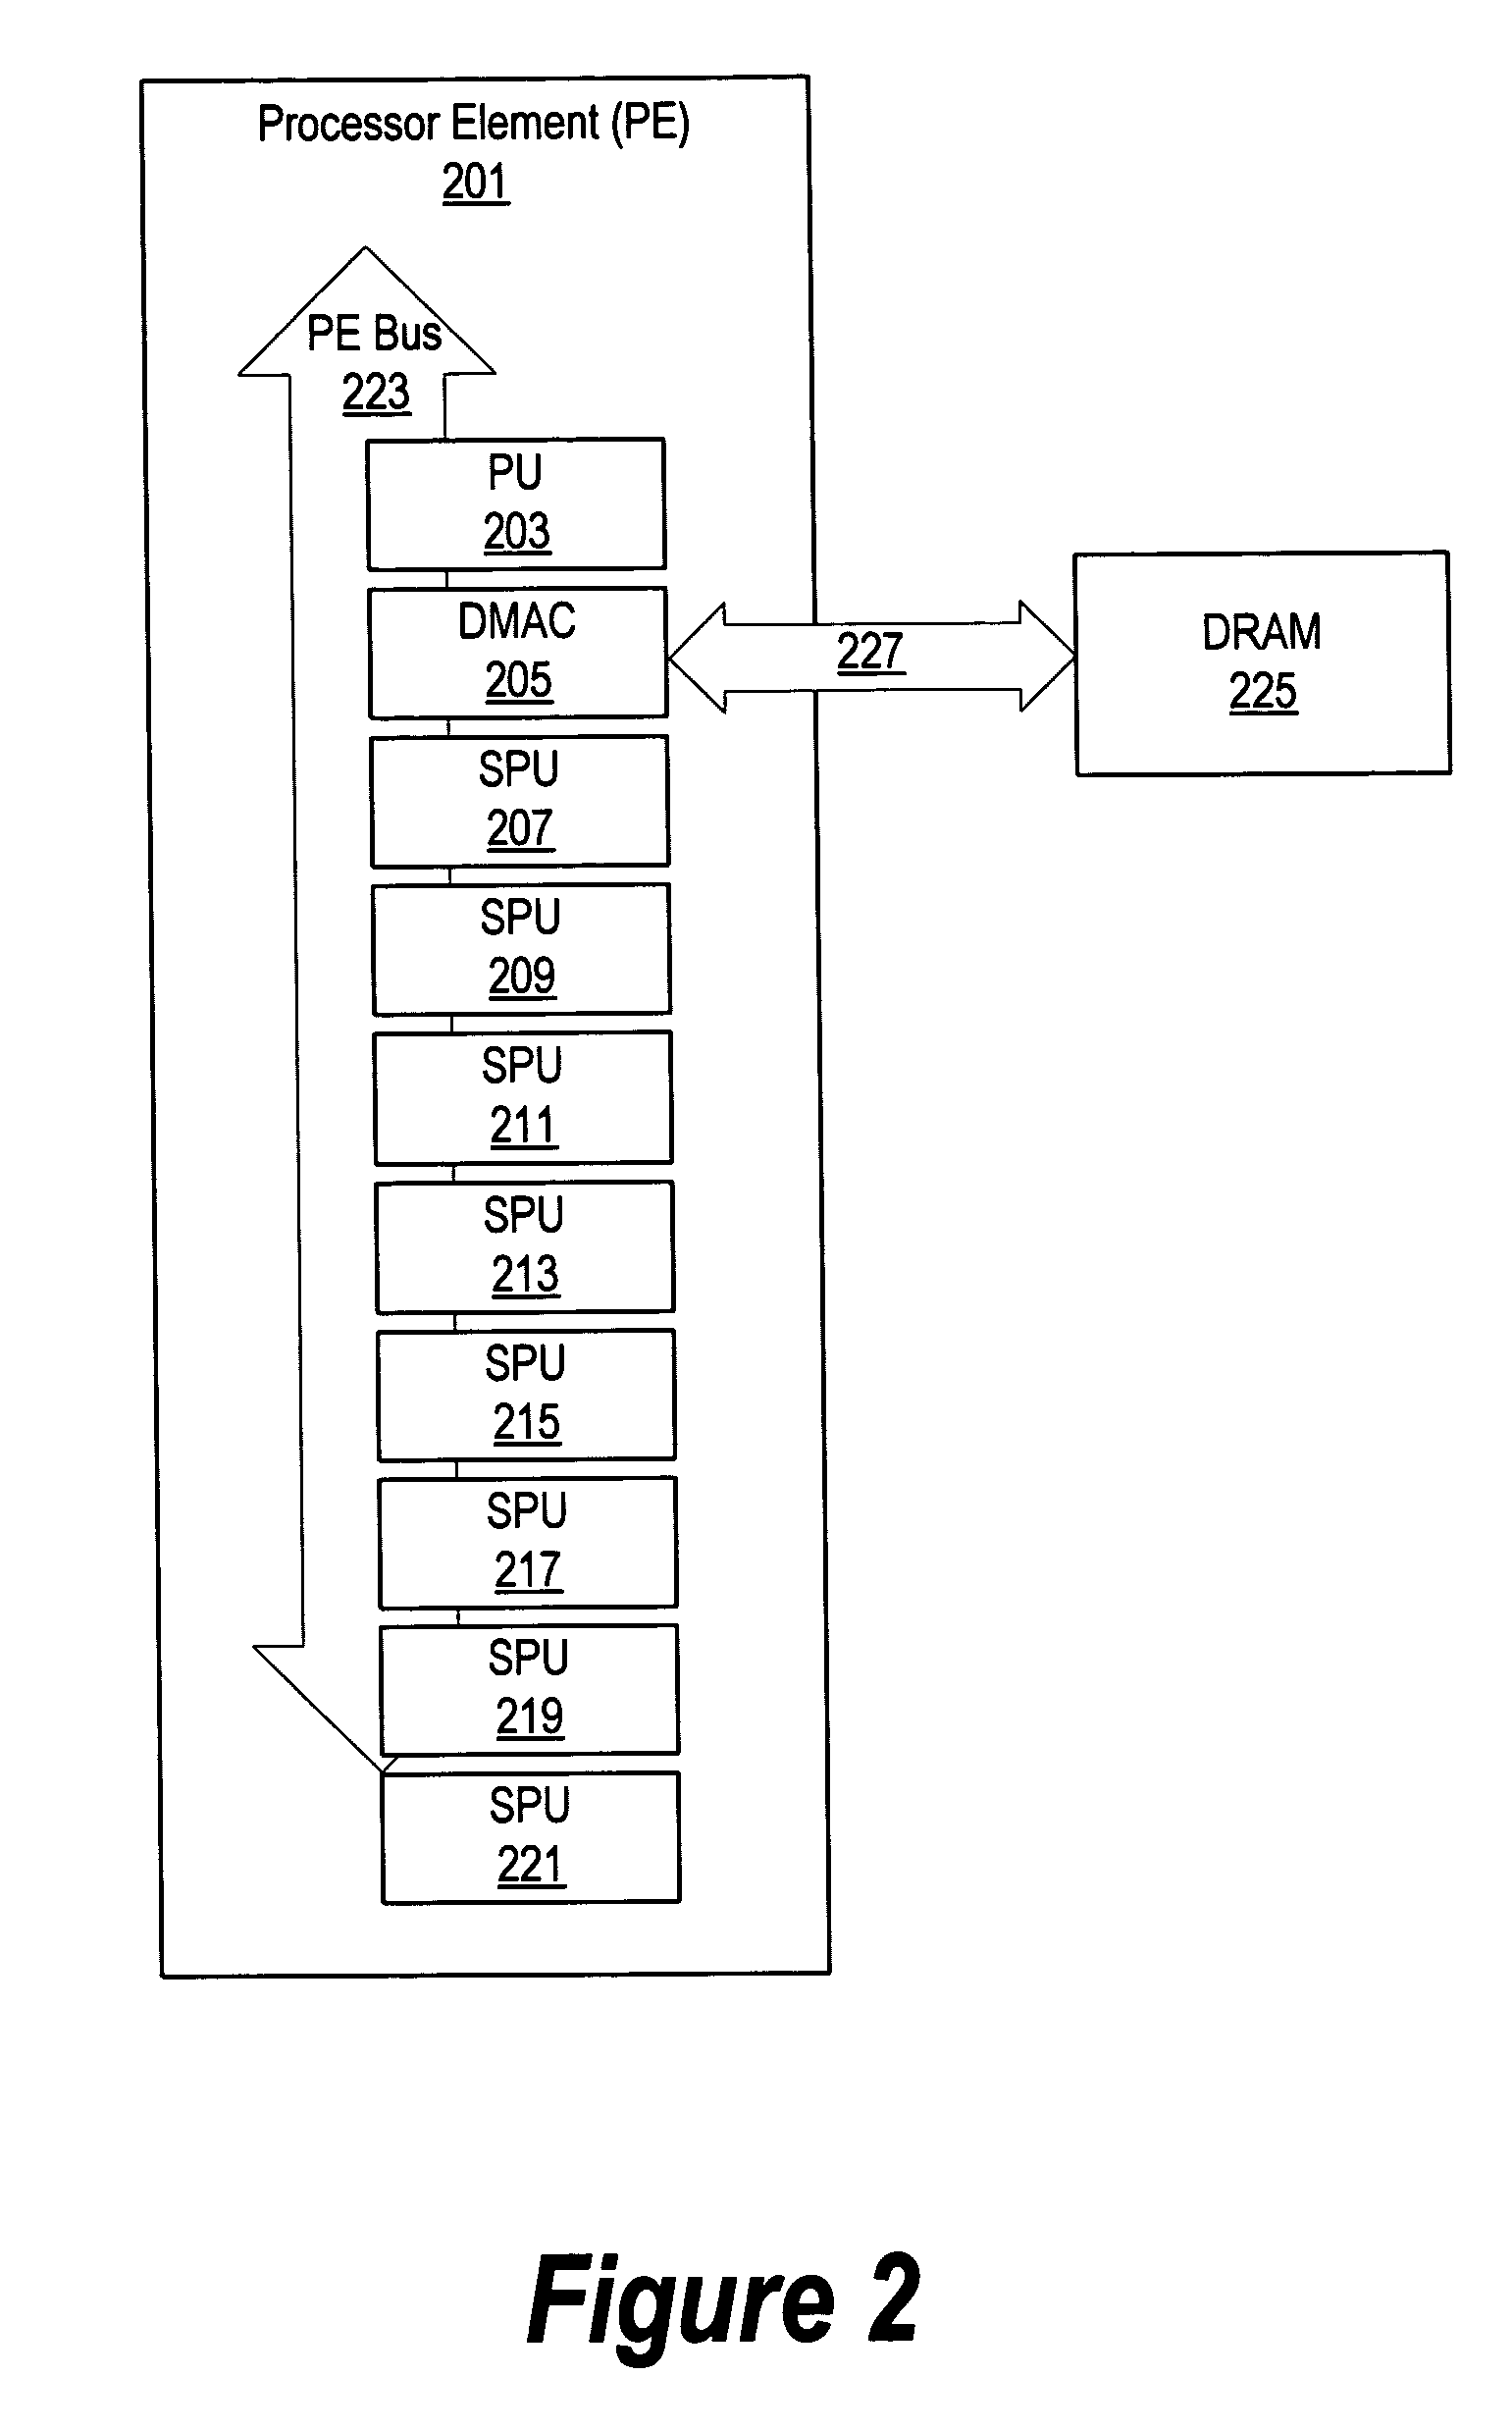 System and method for dynamically partitioning processing across plurality of heterogeneous processors